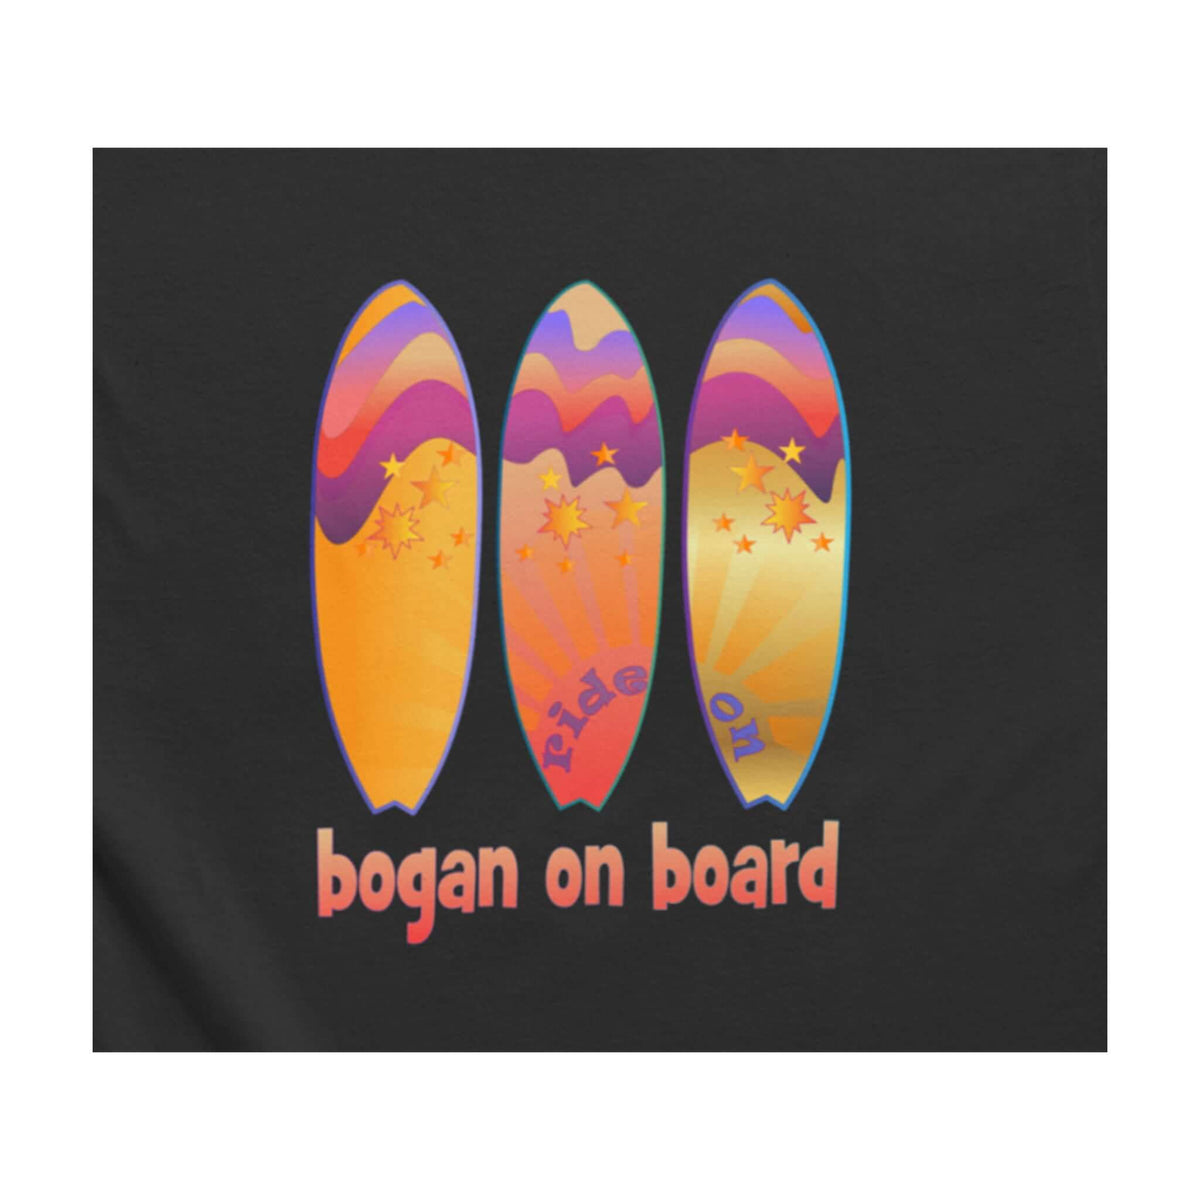 Bogan on Board graphic design featuring three brightly coloured surfboards on black.